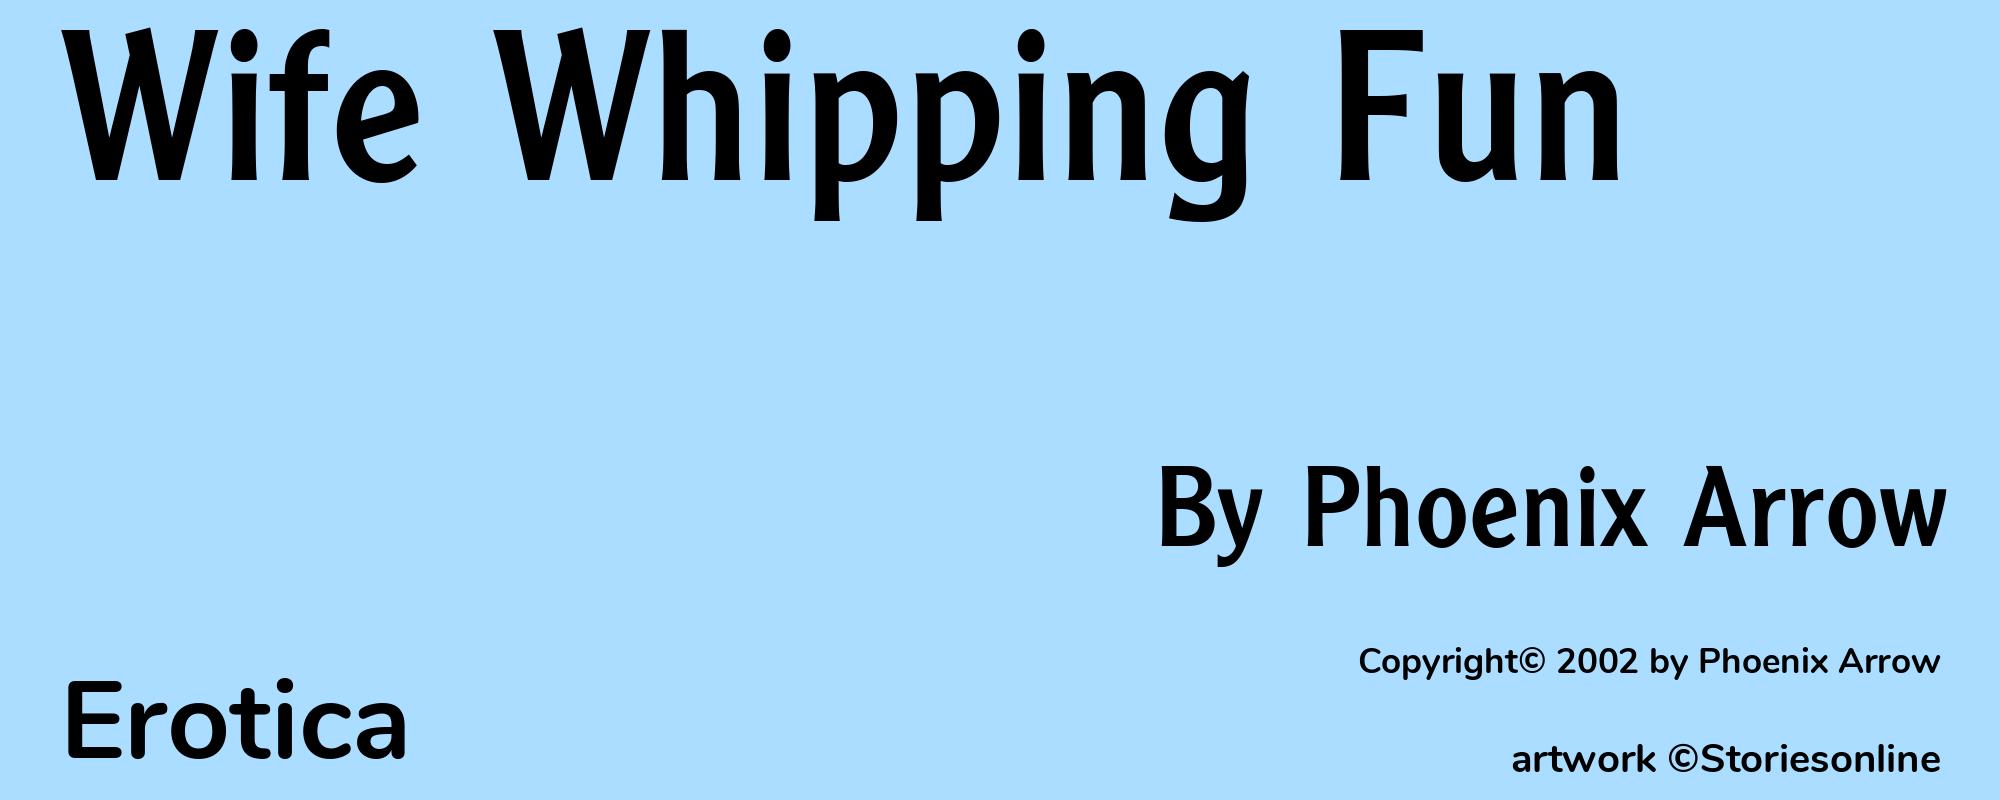 Wife Whipping Fun - Cover